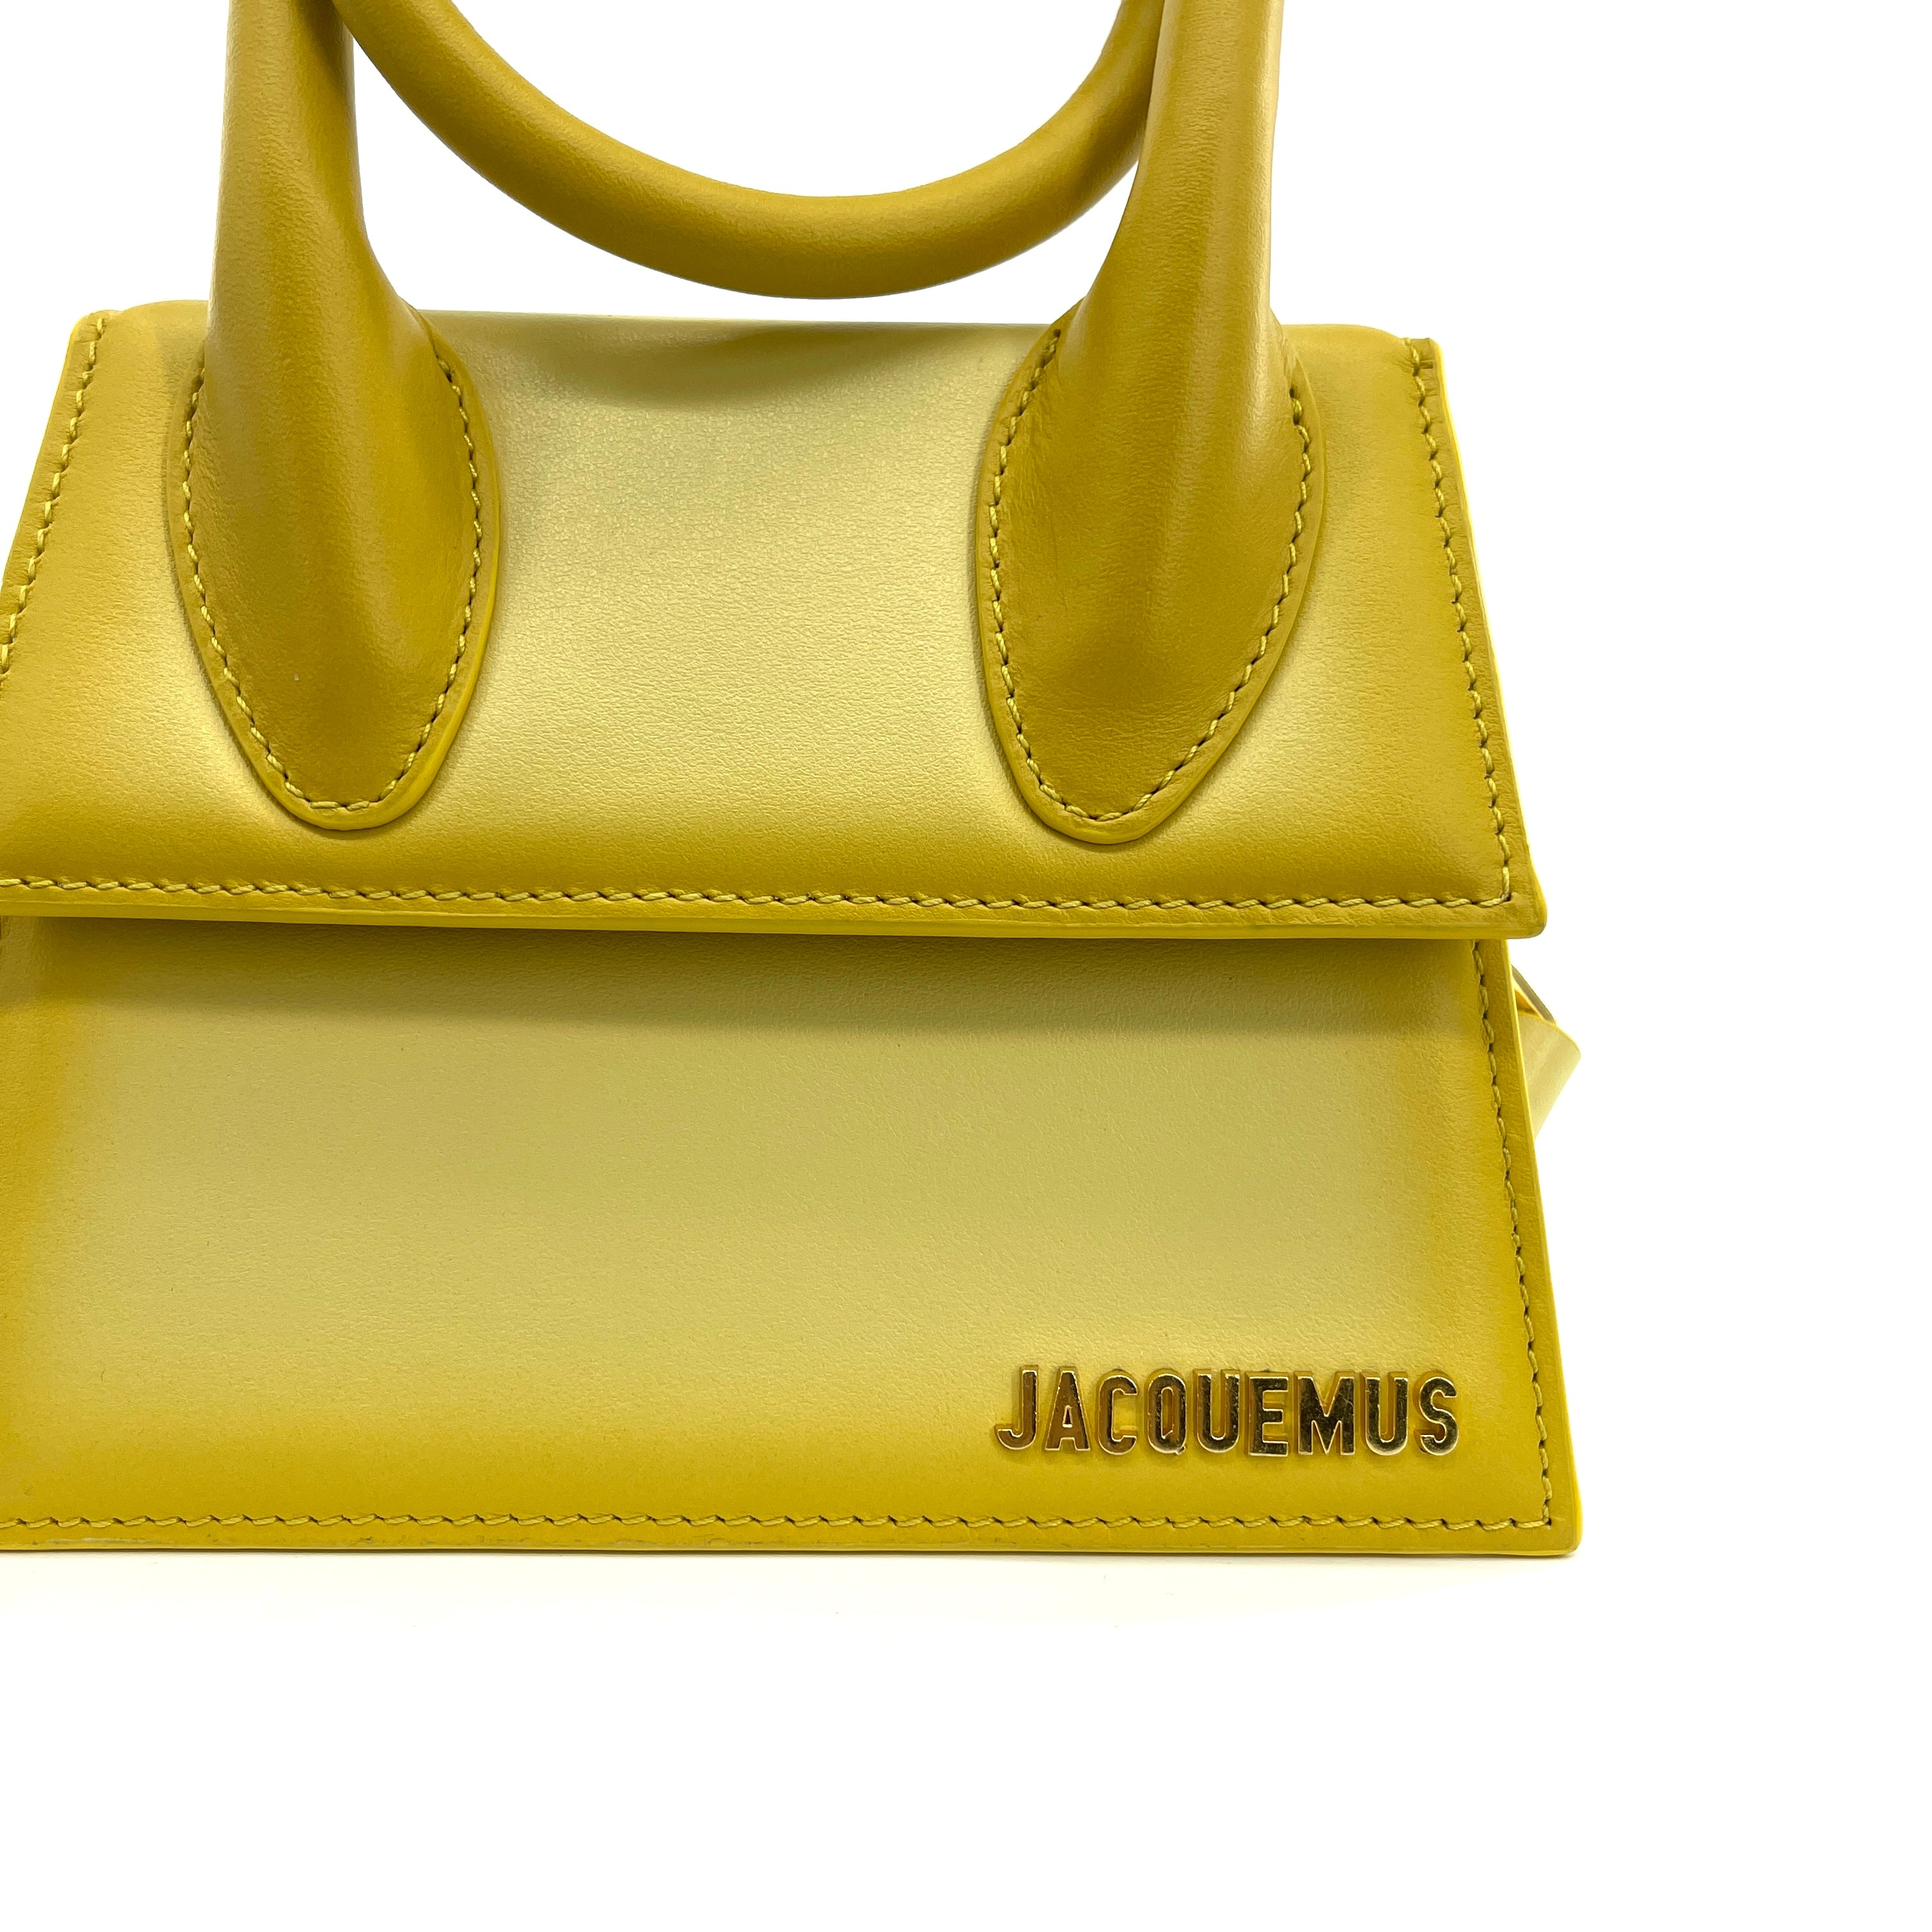 Le Chiquito Noeud Bag Gradient Yellow